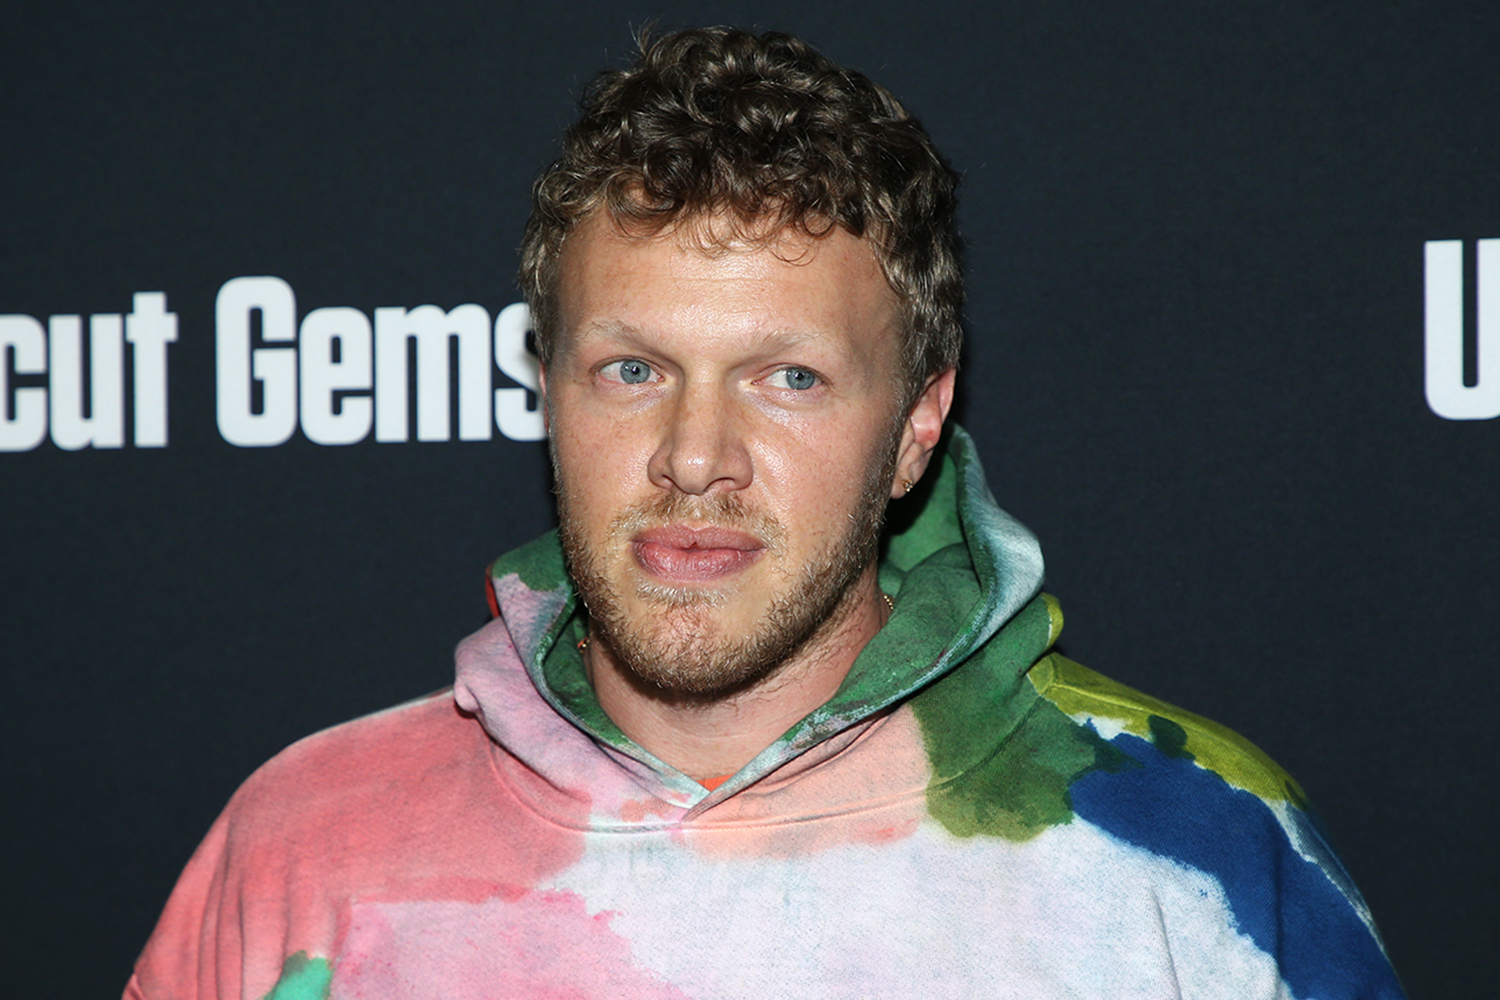 Sebastian Bear McClard attends the premiere of A24's "Uncut Gems" at The Dome at Arclight Hollywood on December 11, 2019 in Hollywood, California.